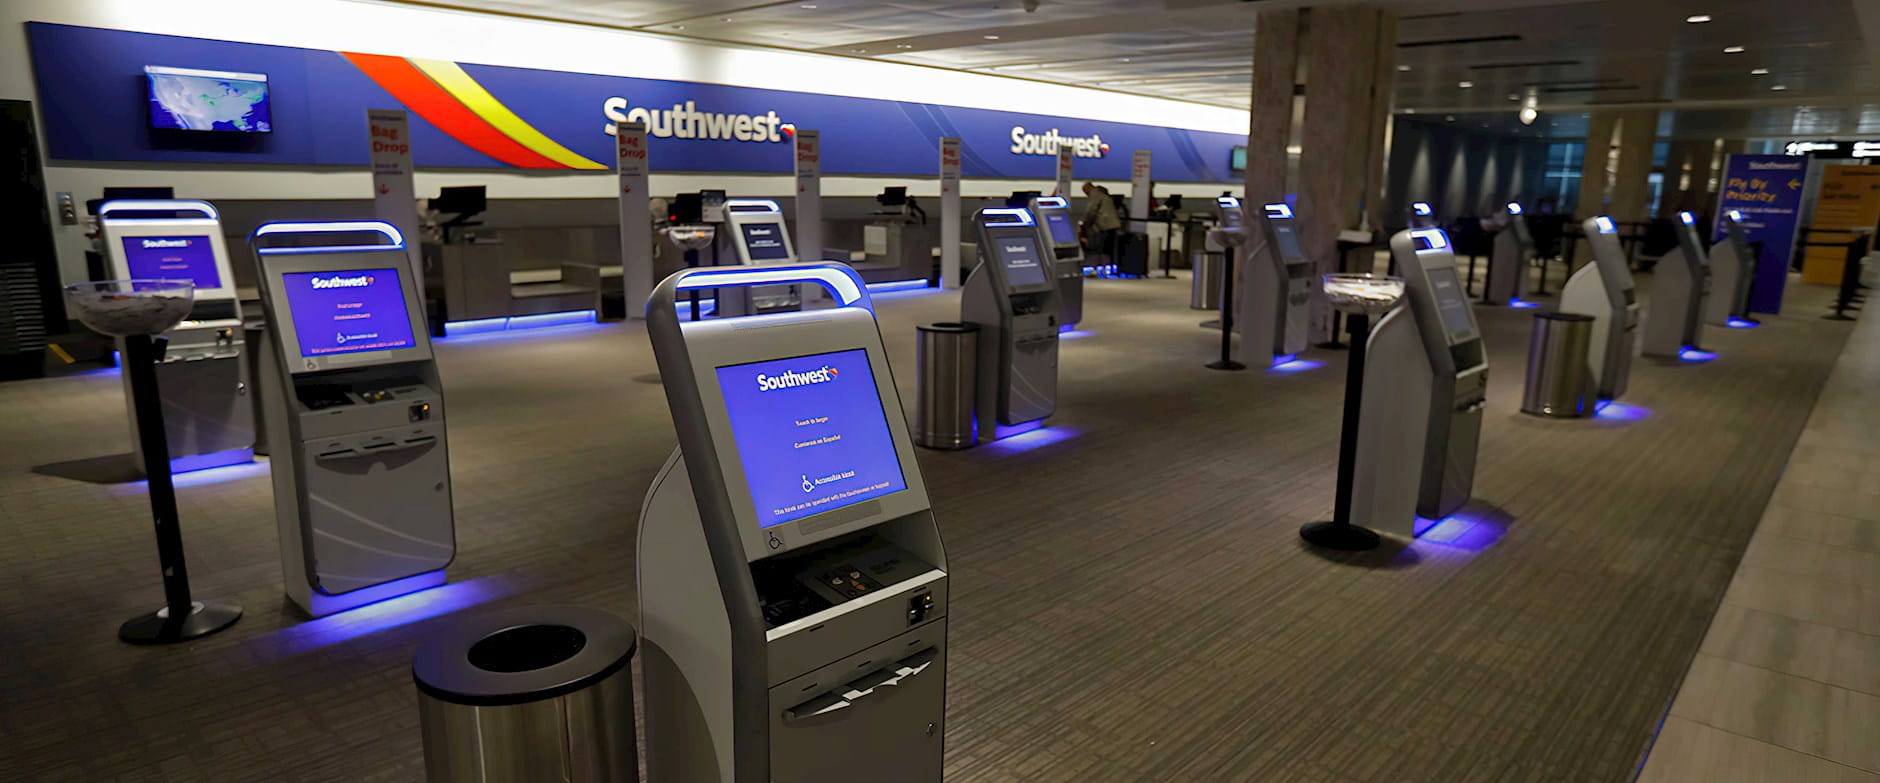 Southwest airlines check in kiosk at airport